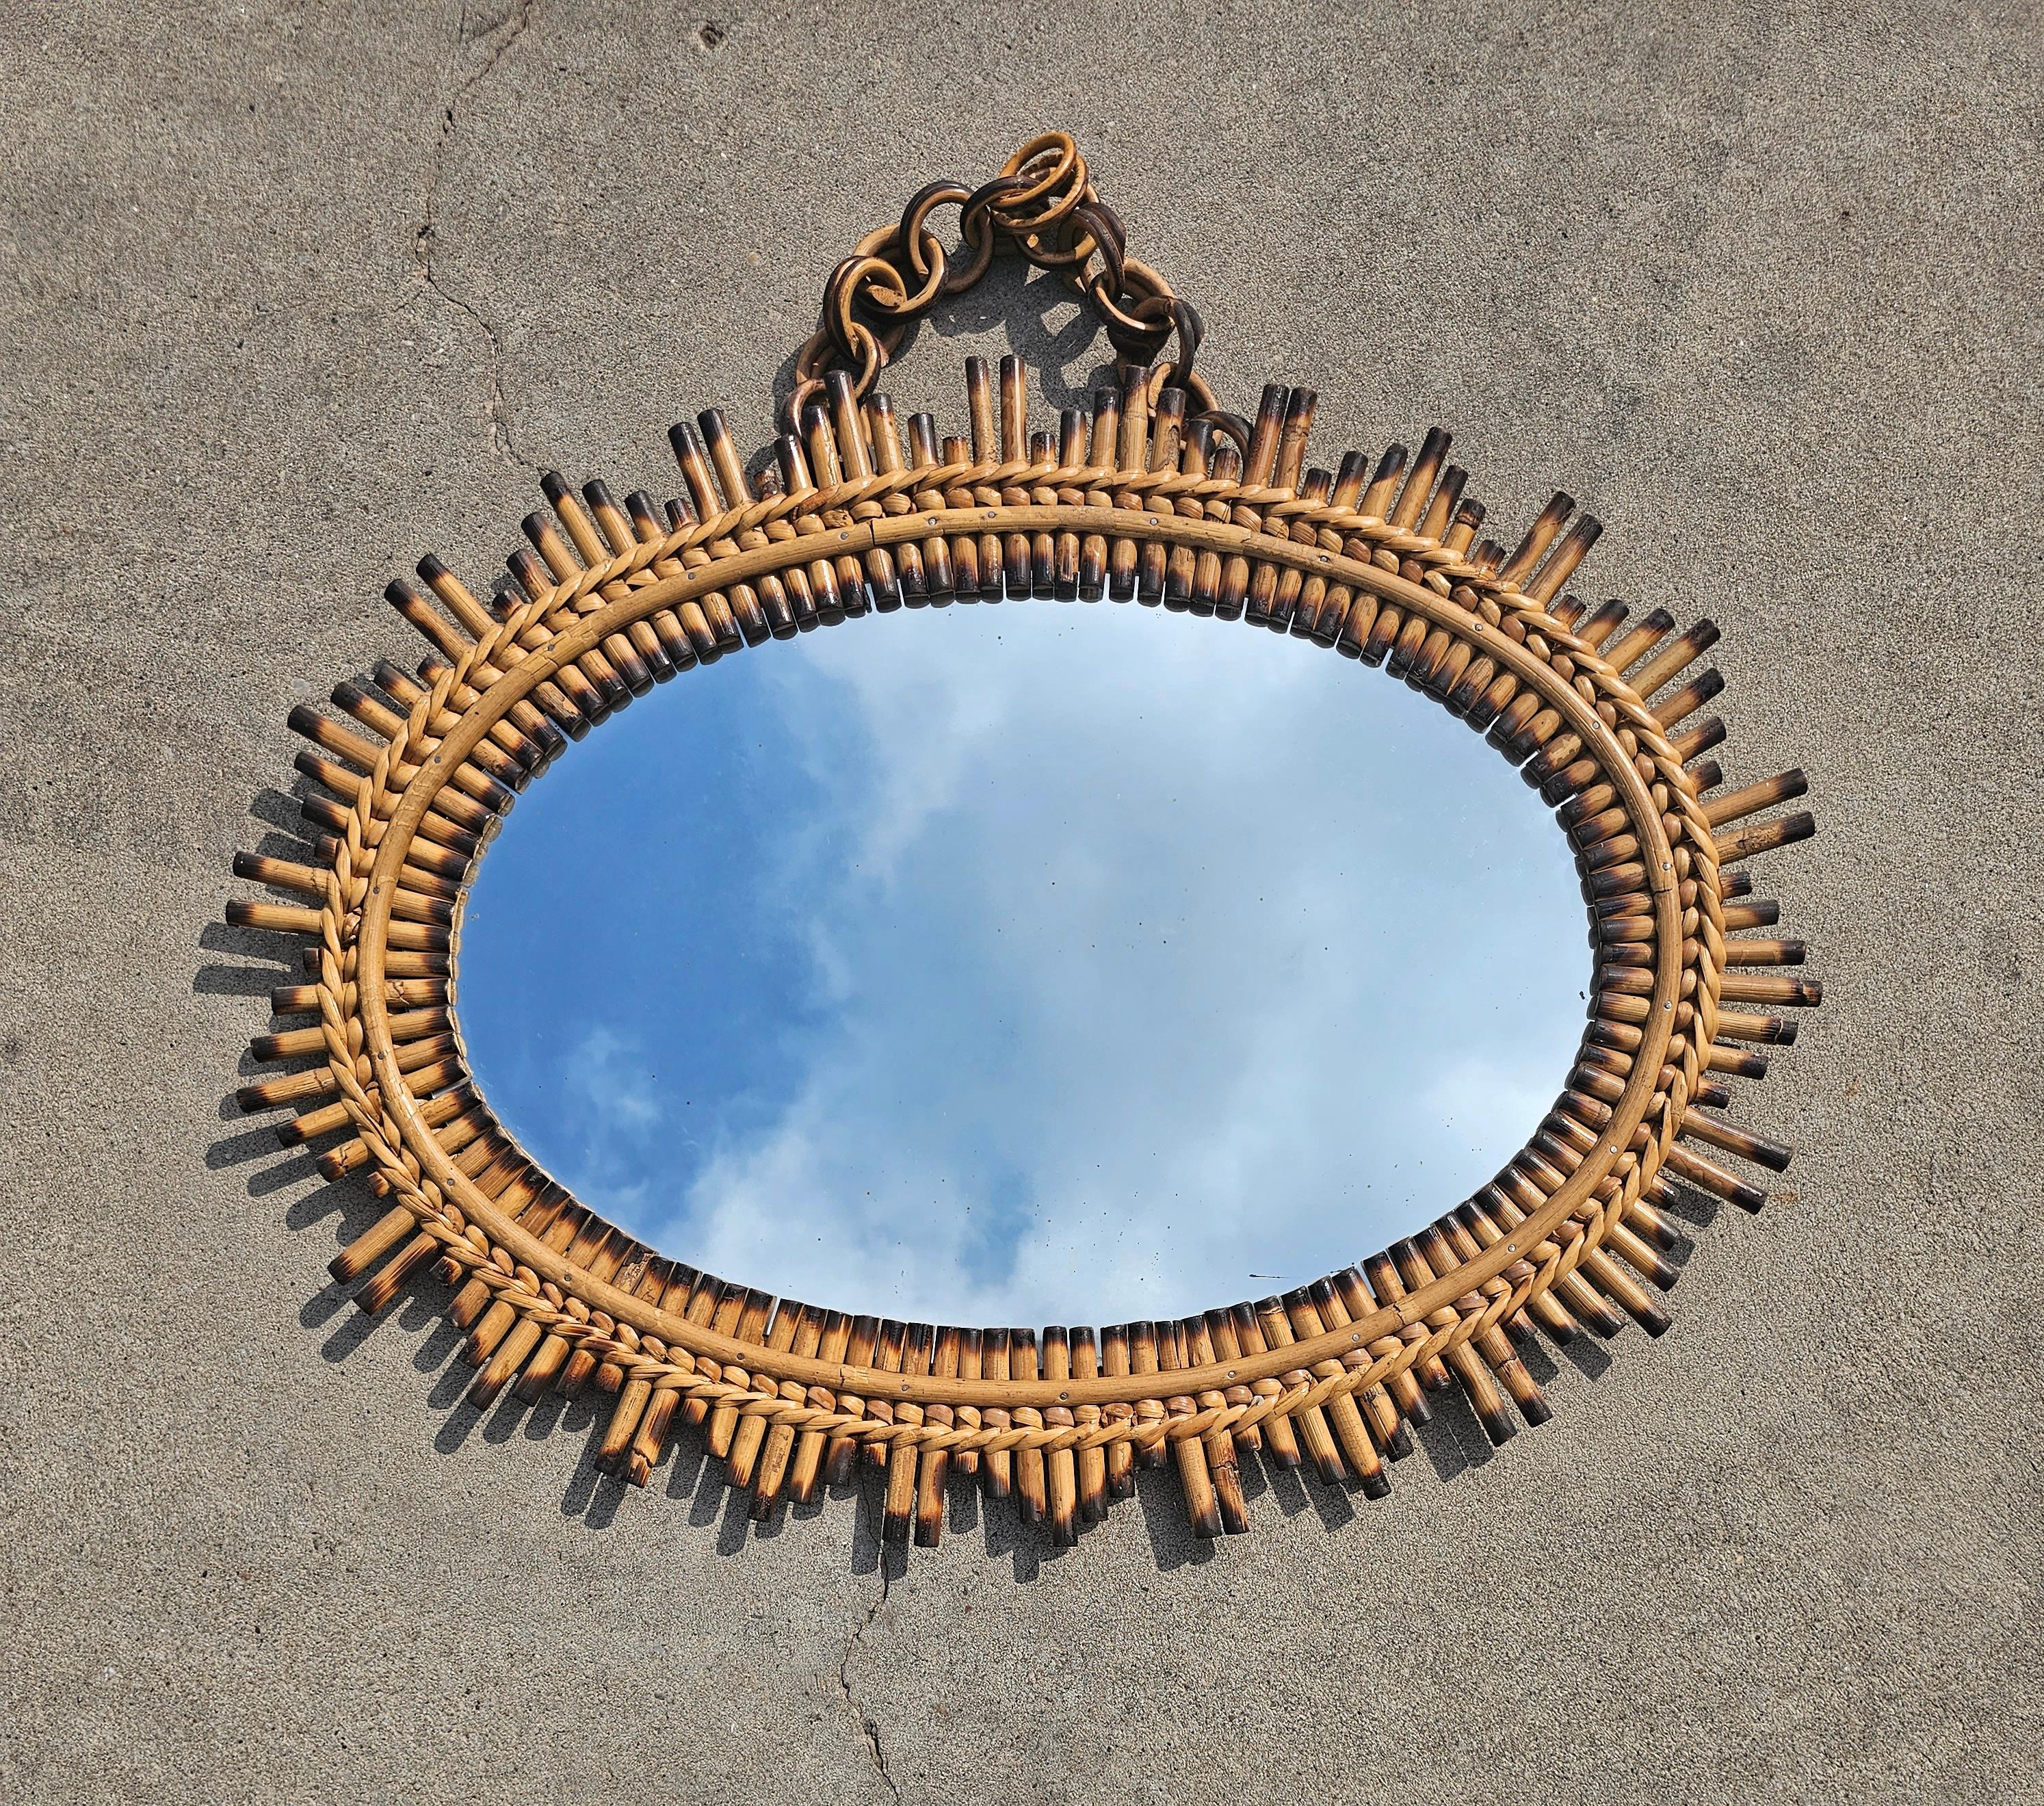 In this listing you will find a unique oval Mid Century Modern Sunburst Mirror. The frame of the mirror is done in bamboo, with burnt tips, giving it striking look. The mirror is wall mounted, with equally striking chain made of rattan. Made in